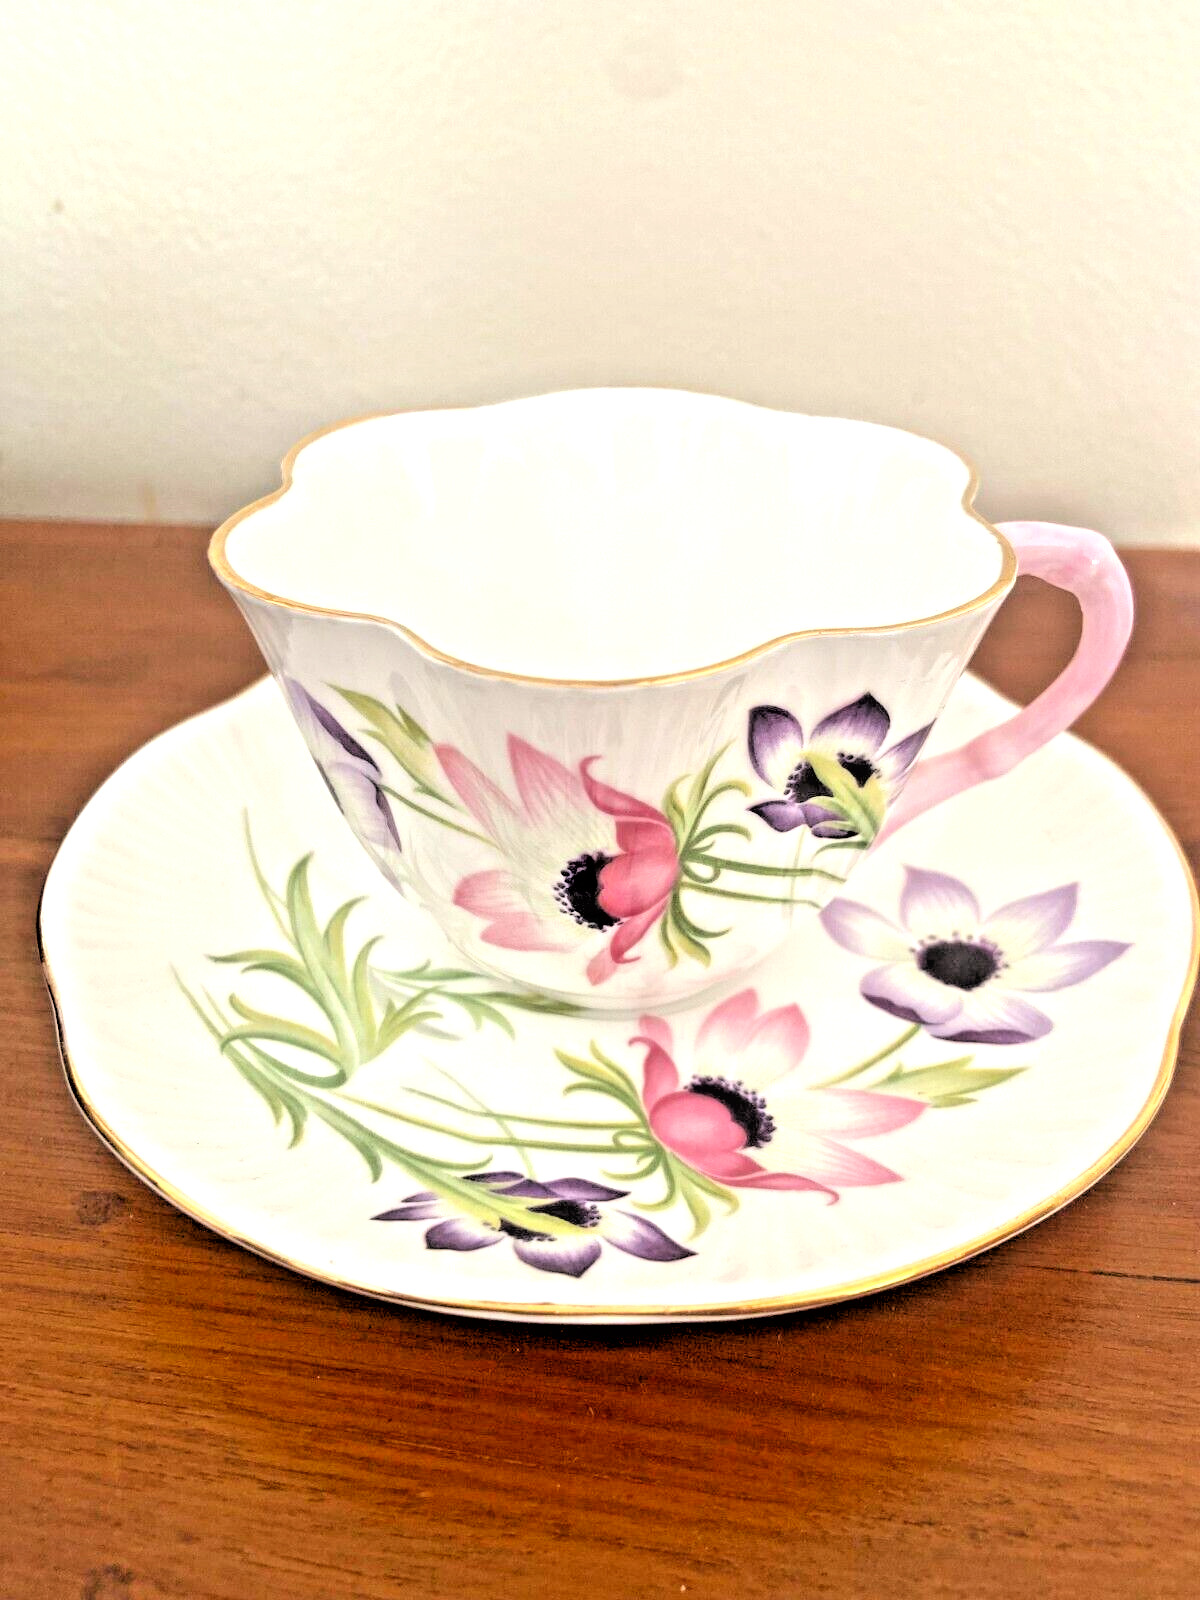 rare Shelley Dainty Anemone PATTERN Tea Cup & Saucer Plate w/PINK & PURPLE#14006